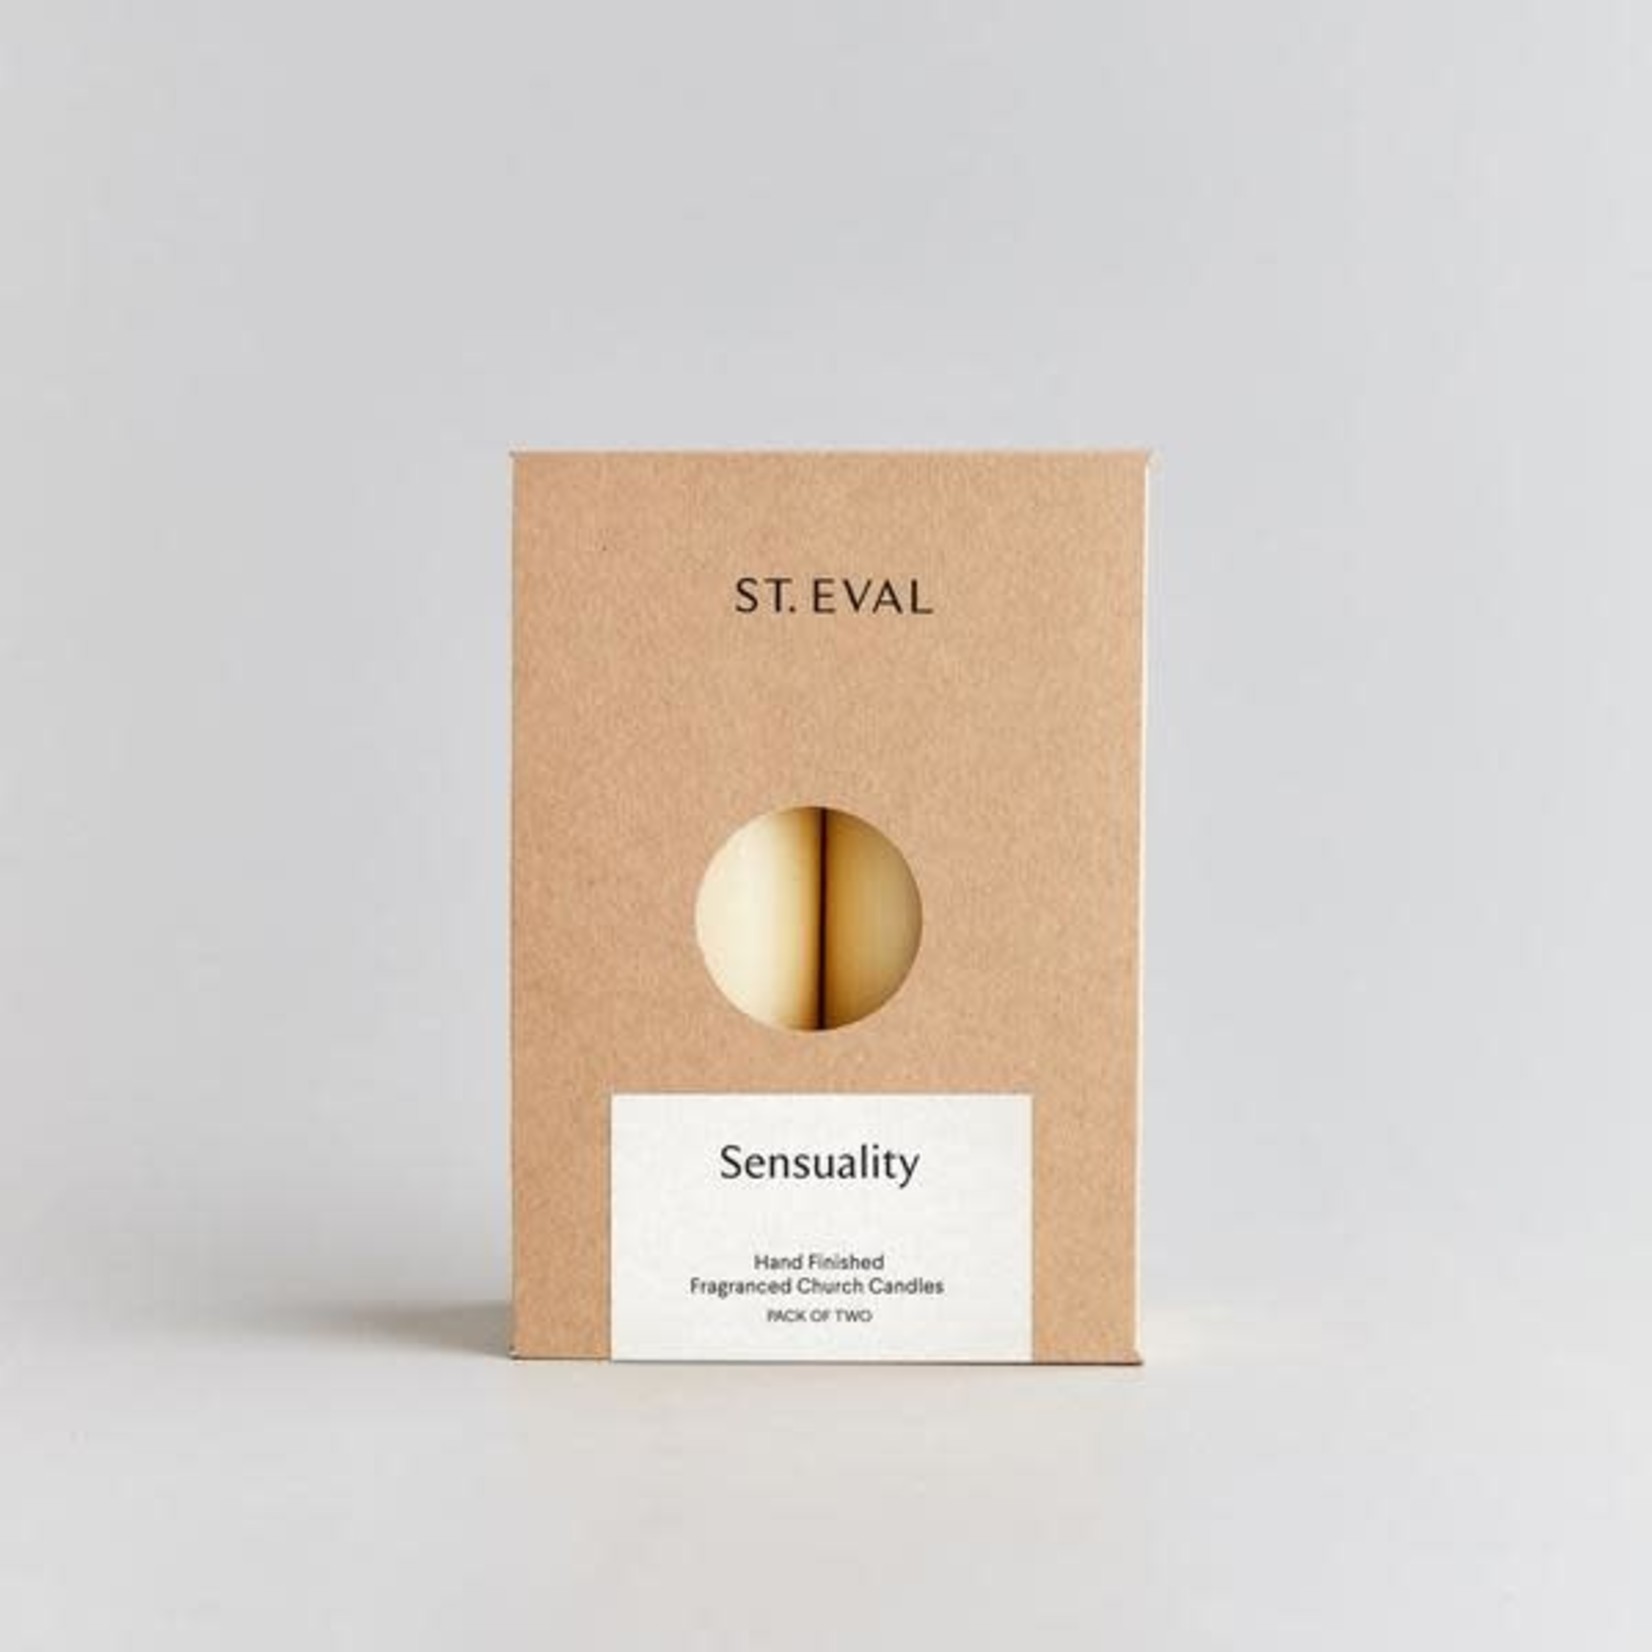 St. Eval St Eval Sensuality 2"x6" Pillar Candle, pack of 2